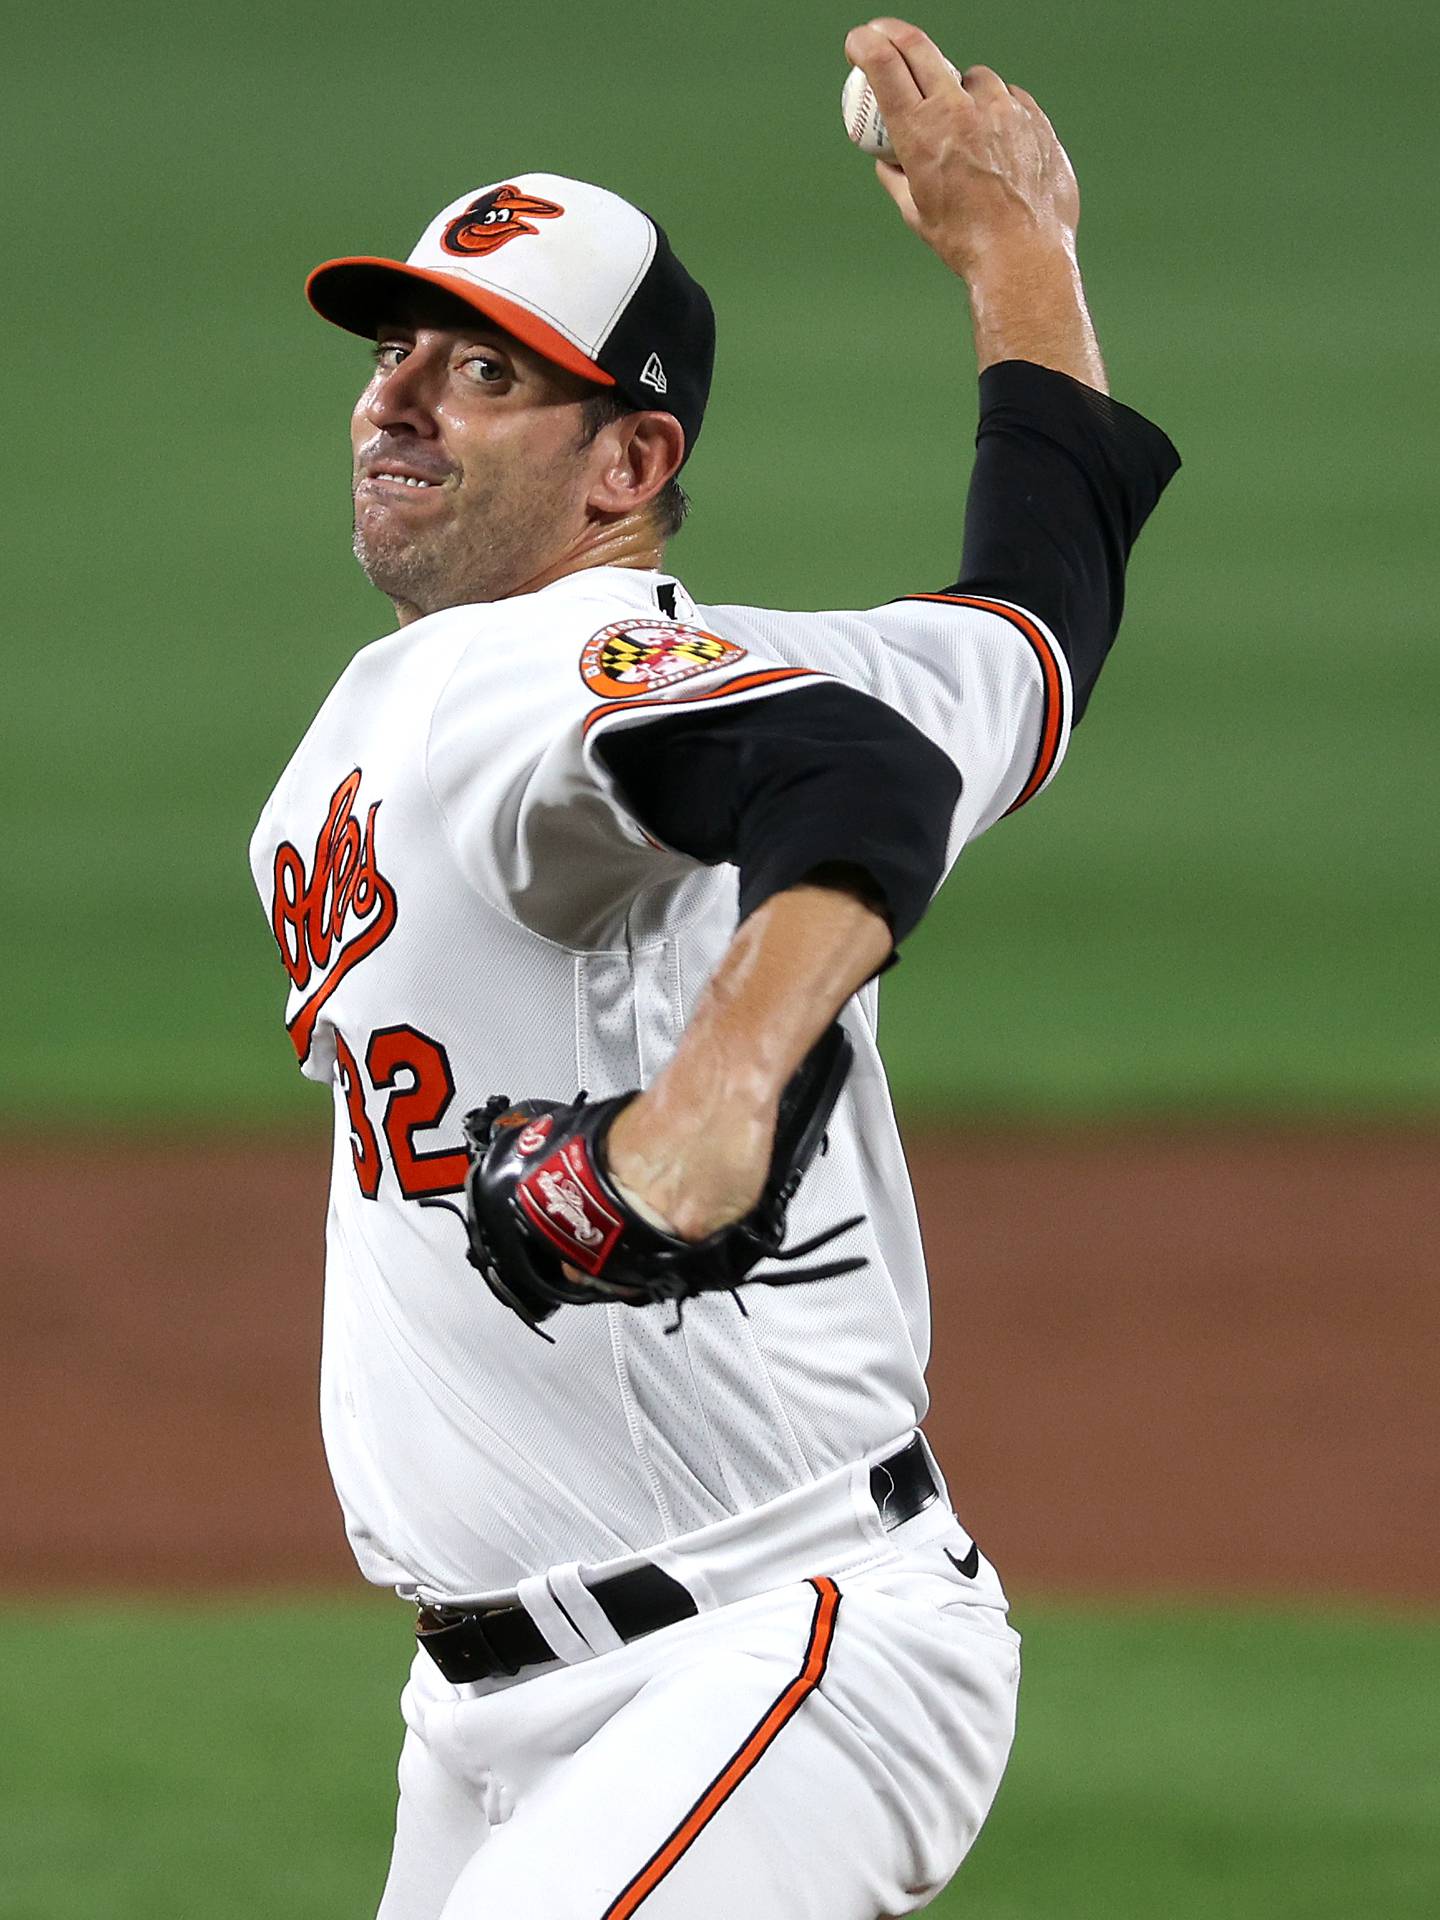 BALTIMORE, MD - JULY 08: Trey Mancini #16 of the Baltimore Orioles celebrates after hitting a walk off single against the Los Angeles Angels during the ninth inning at Oriole Park at Camden Yards on July 8, 2022 in Baltimore, Maryland. (Photo by Scott Taetsch/Getty Images)